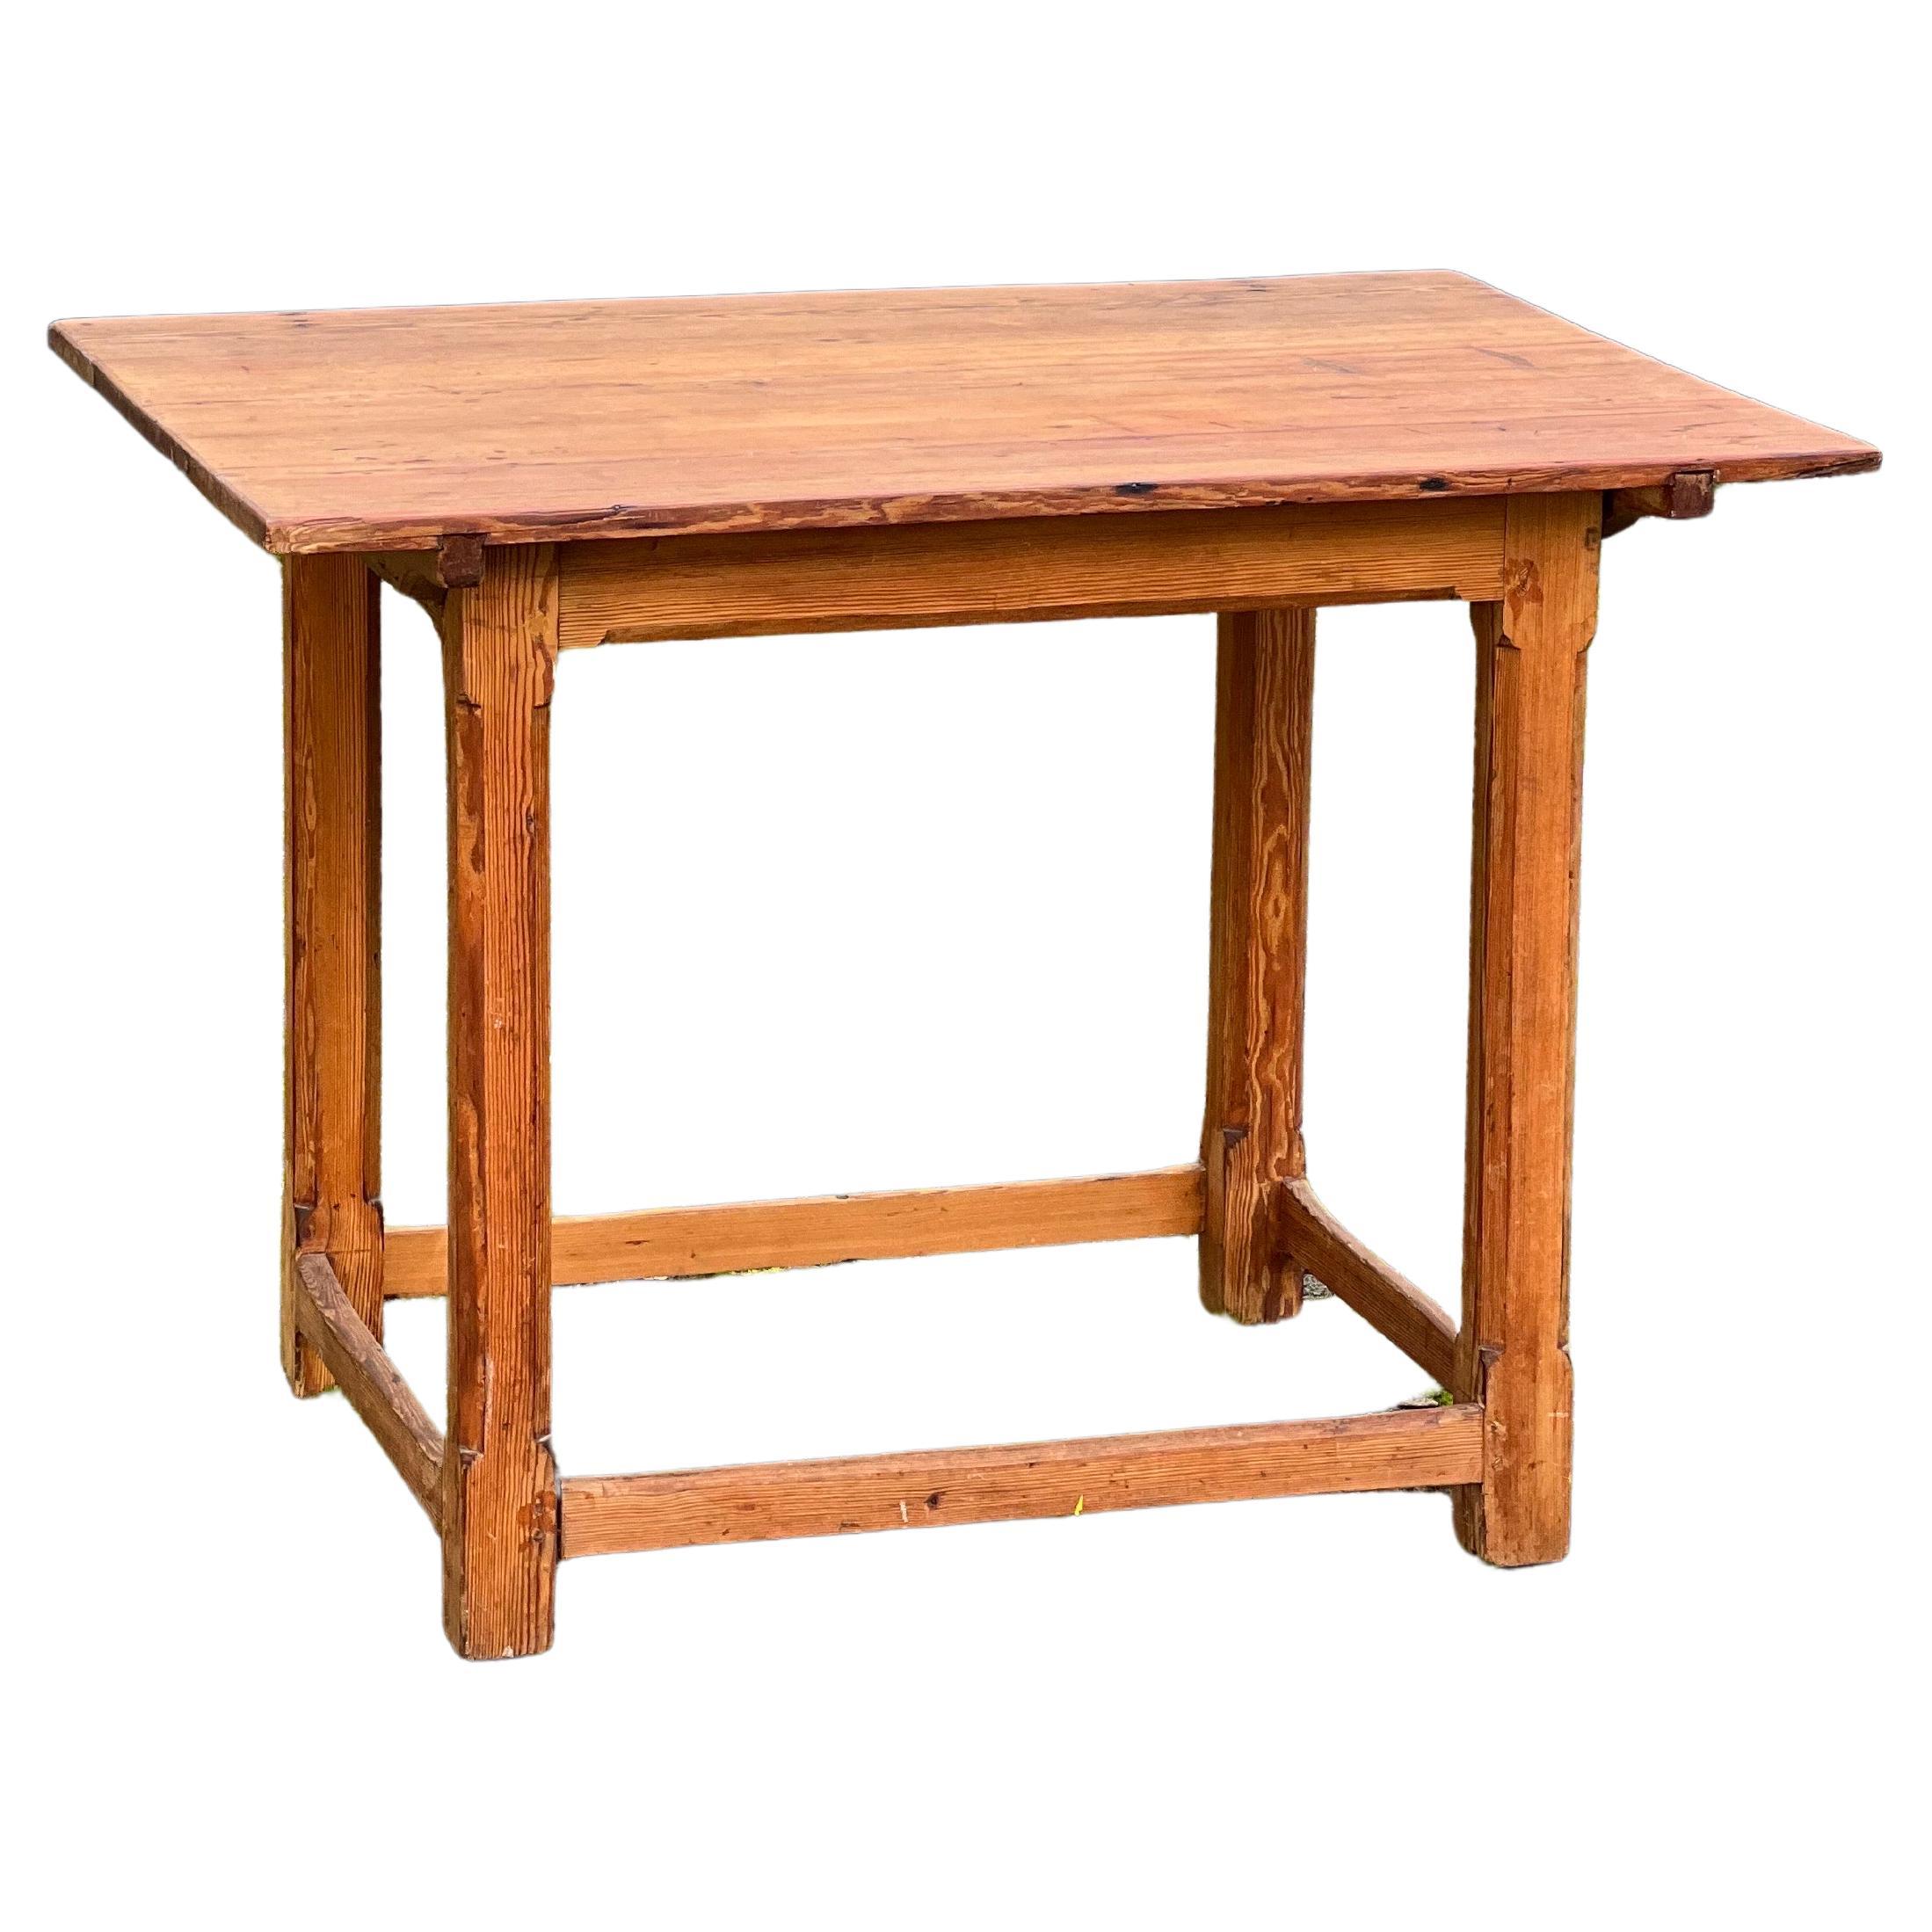 Swedish pine table Dated circa 1800 Folk Art Peasant high quality Hand Crafted For Sale